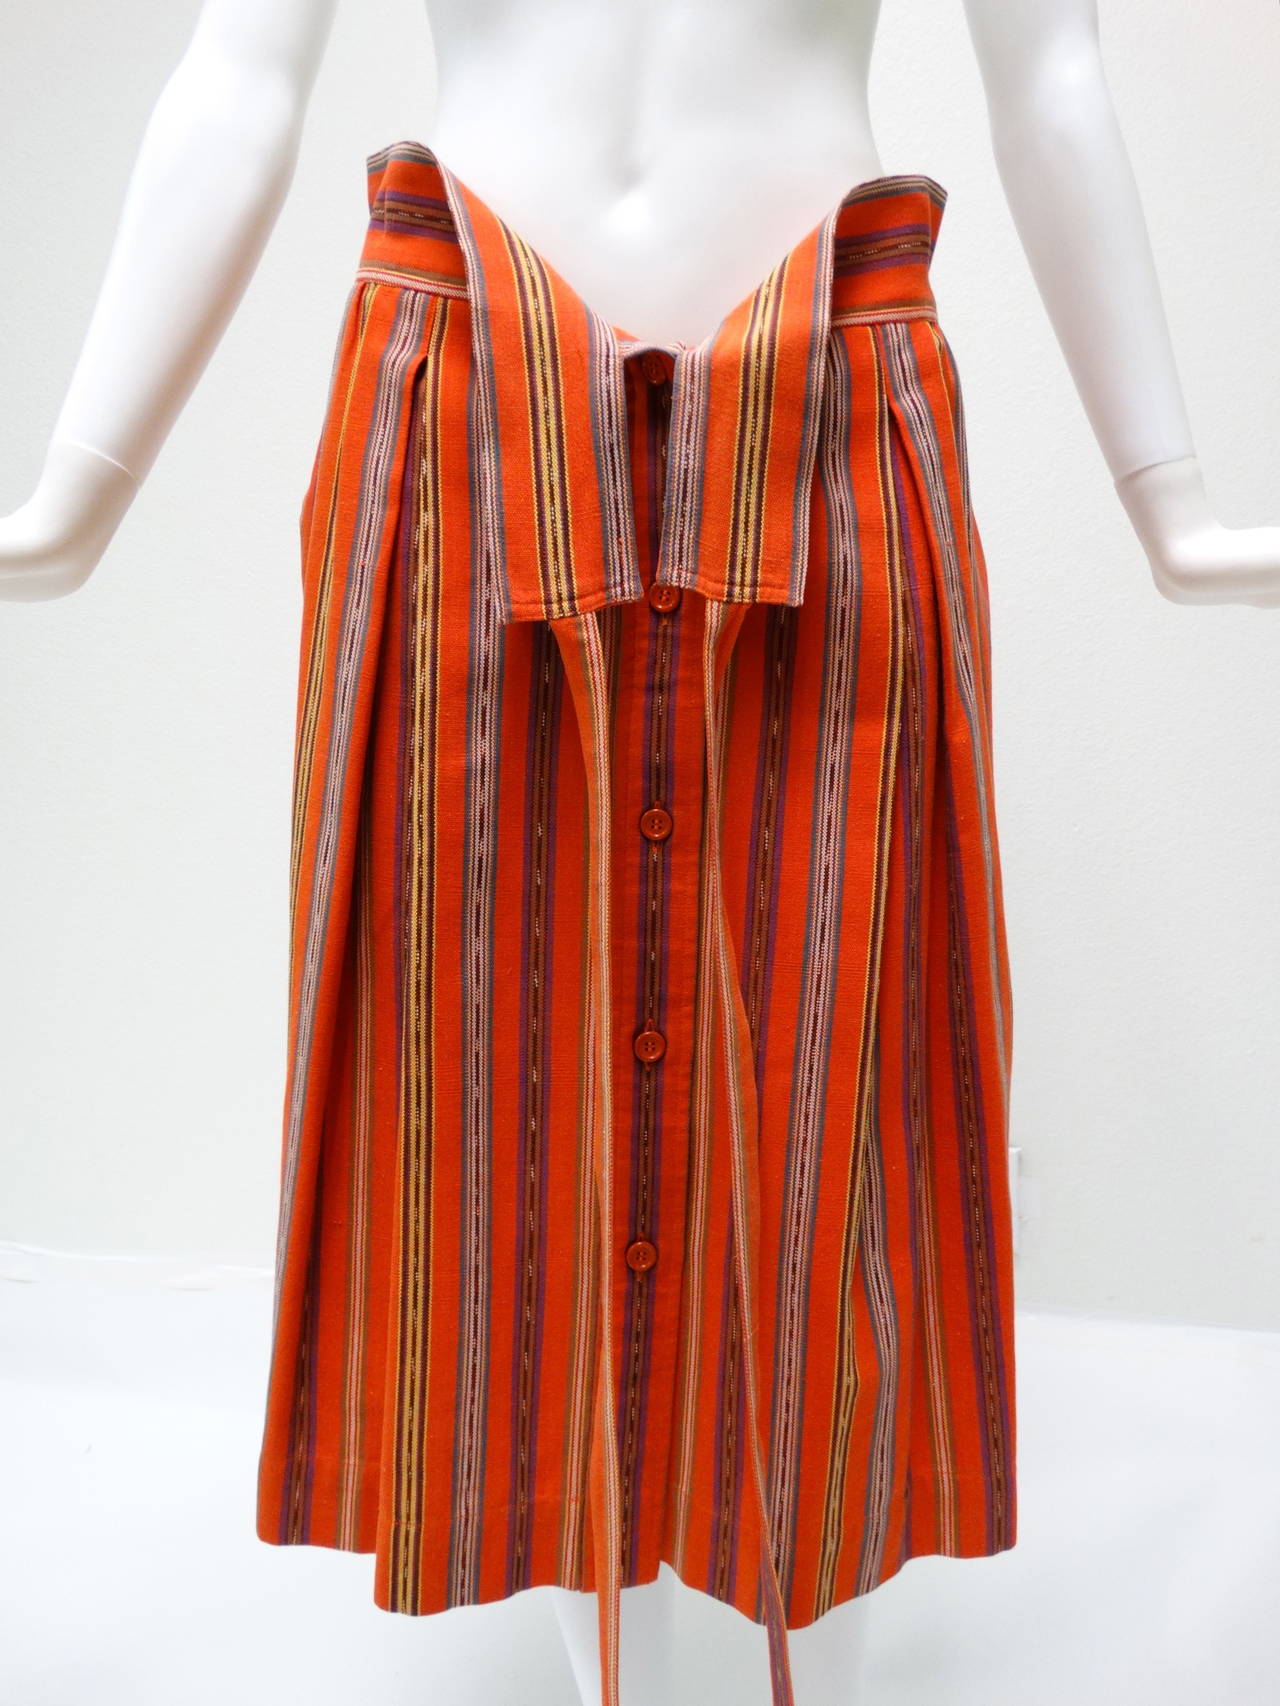 Beautiful rare Saint Laurent 1980's Ethnic Striped Cotton Skirt with an attached Wrap Belt. This lovely buttons down the front and has two pockets on each side. Love the print, it's has a very Saint Laurent Morroccan vibe ! Labeled a size 44, Made